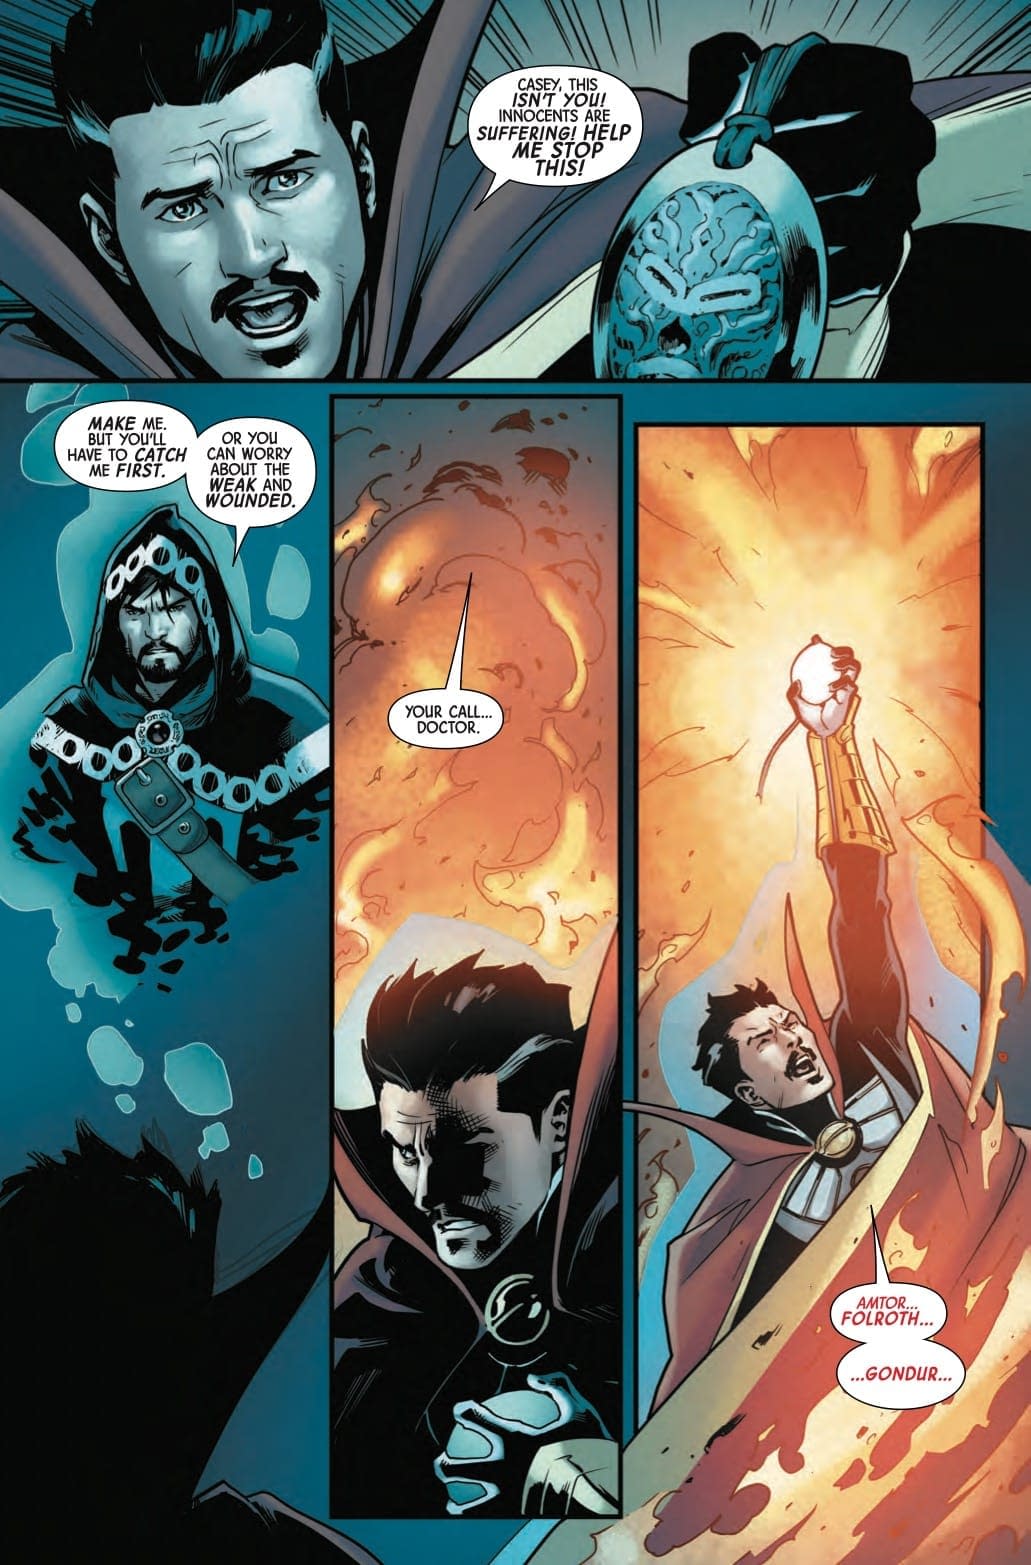 Doctor Strange is Putting Out Fires in Next Week's Doctor Strange #7